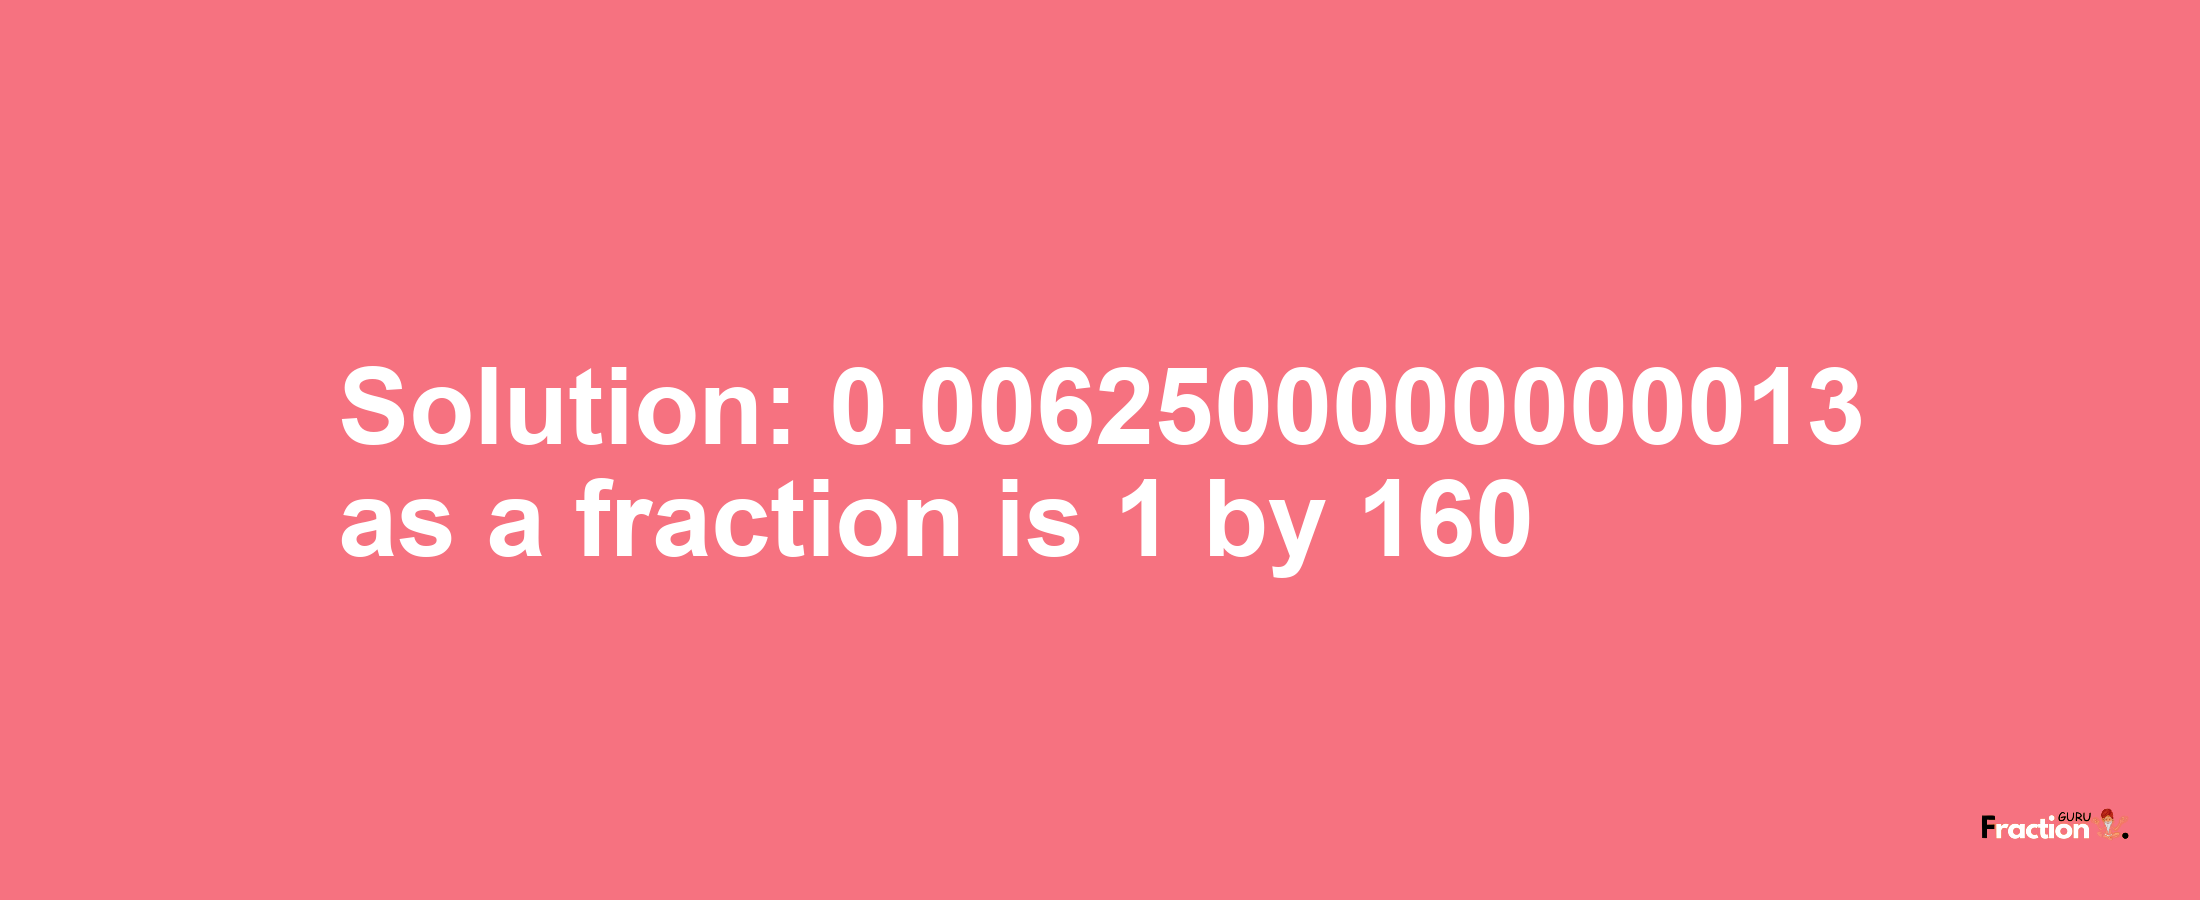 Solution:0.0062500000000013 as a fraction is 1/160